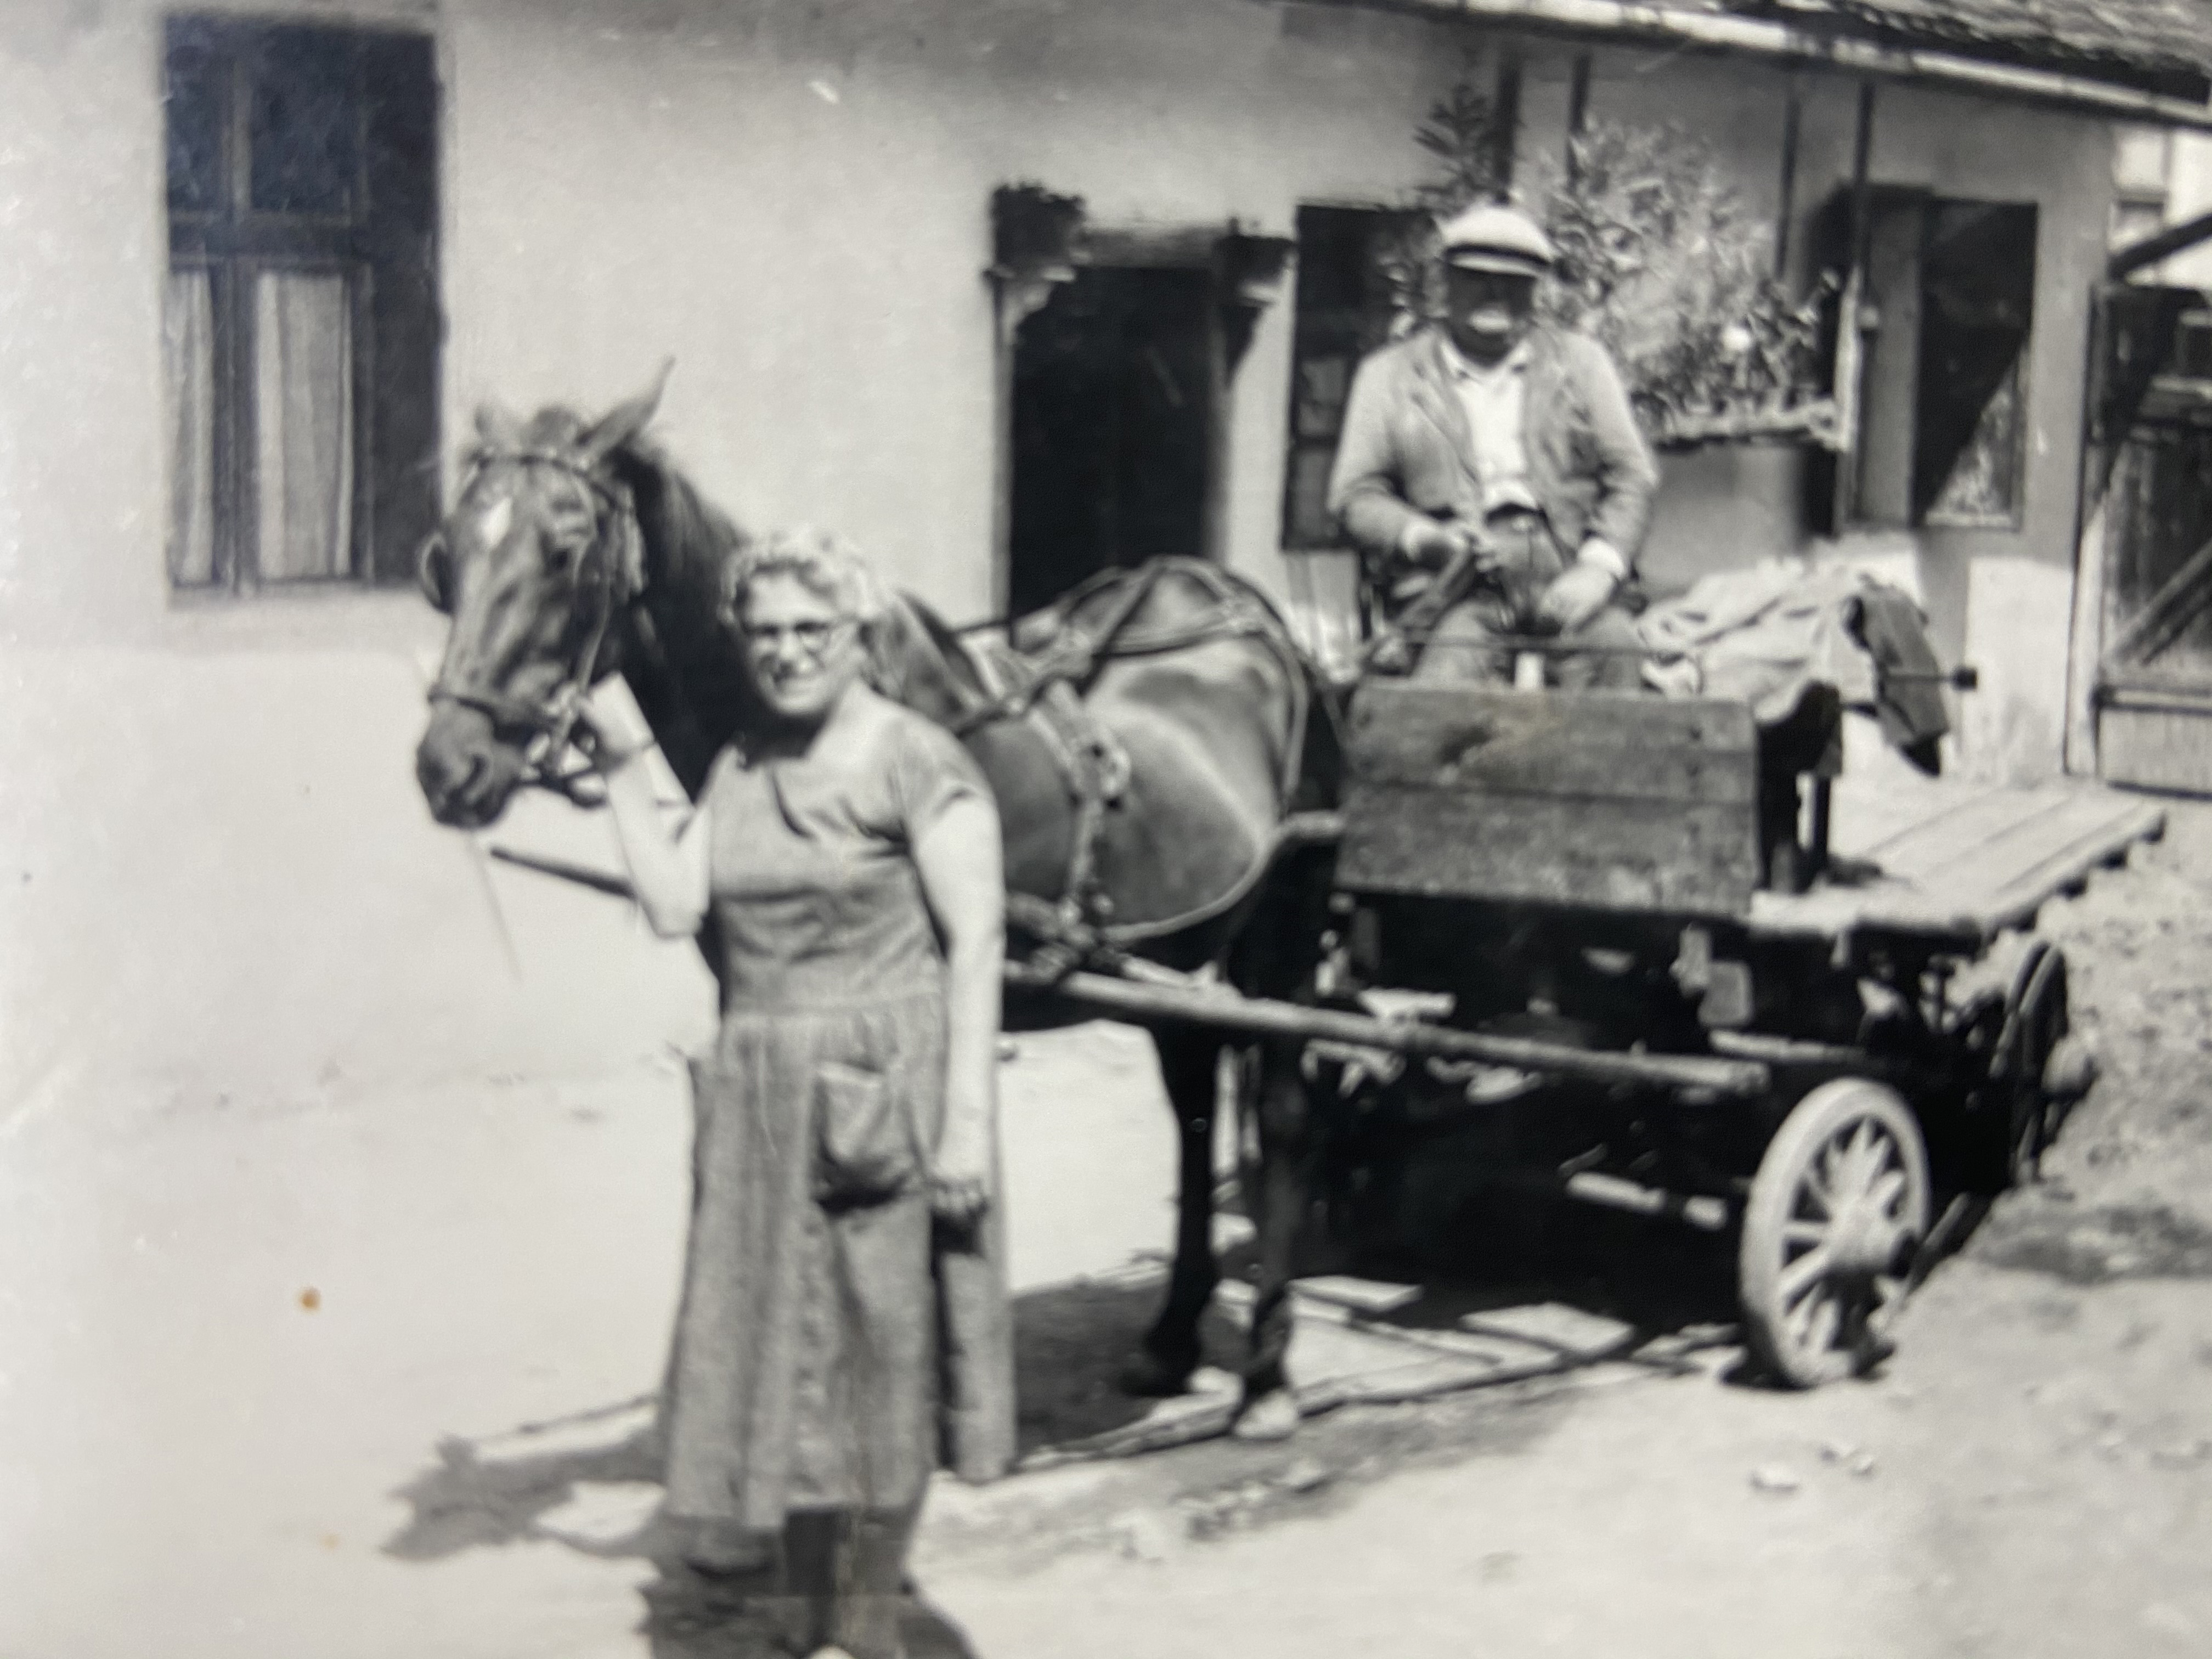 Motke's parents, Avraham and Margarita. Motke's father worked as a carriage driver. Motke says he really liked helping his father with the horses.